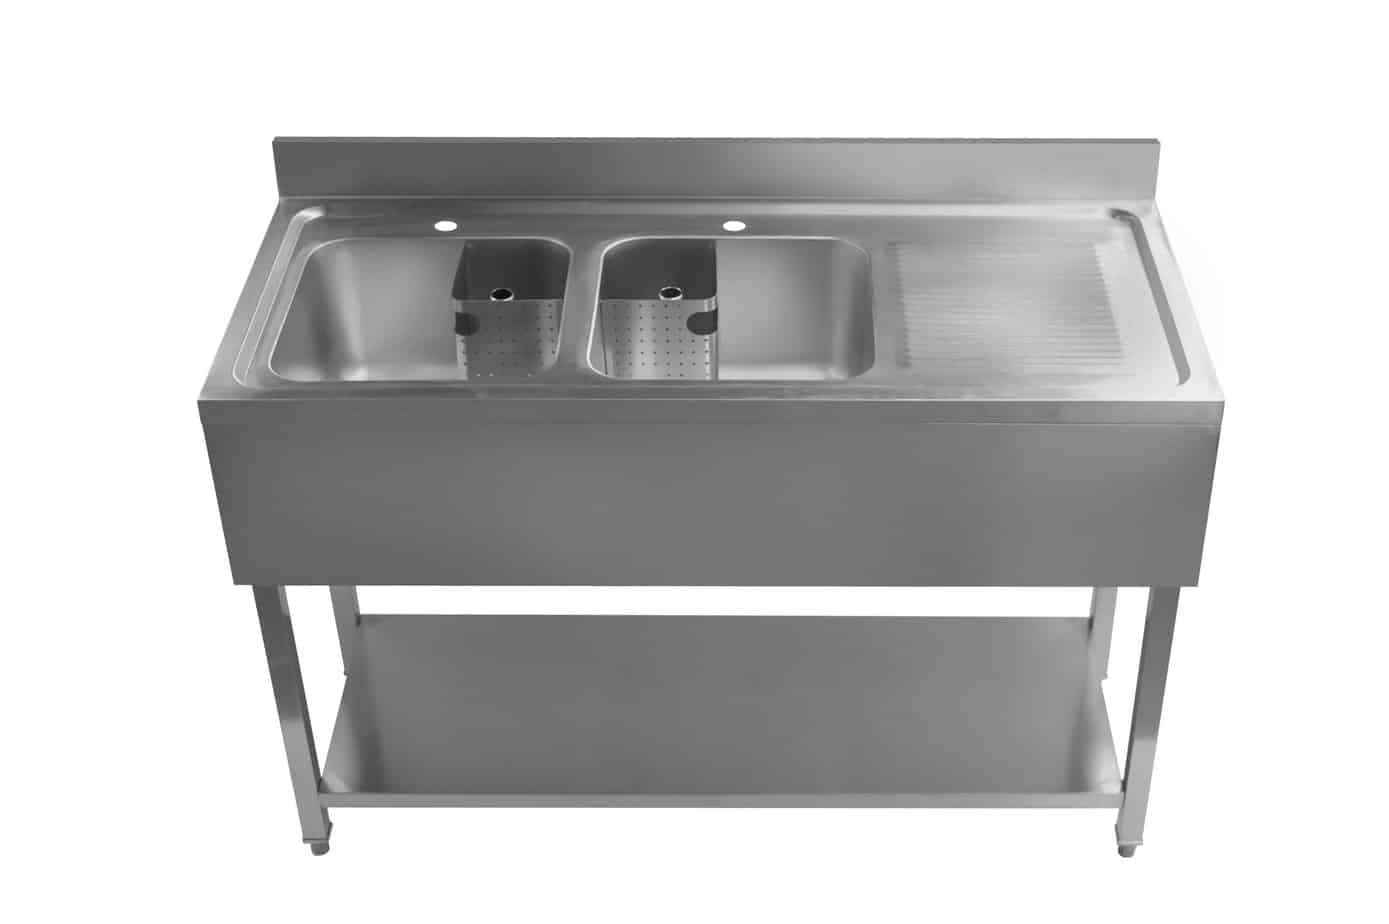 image of protruding sink in kitchen at an angle